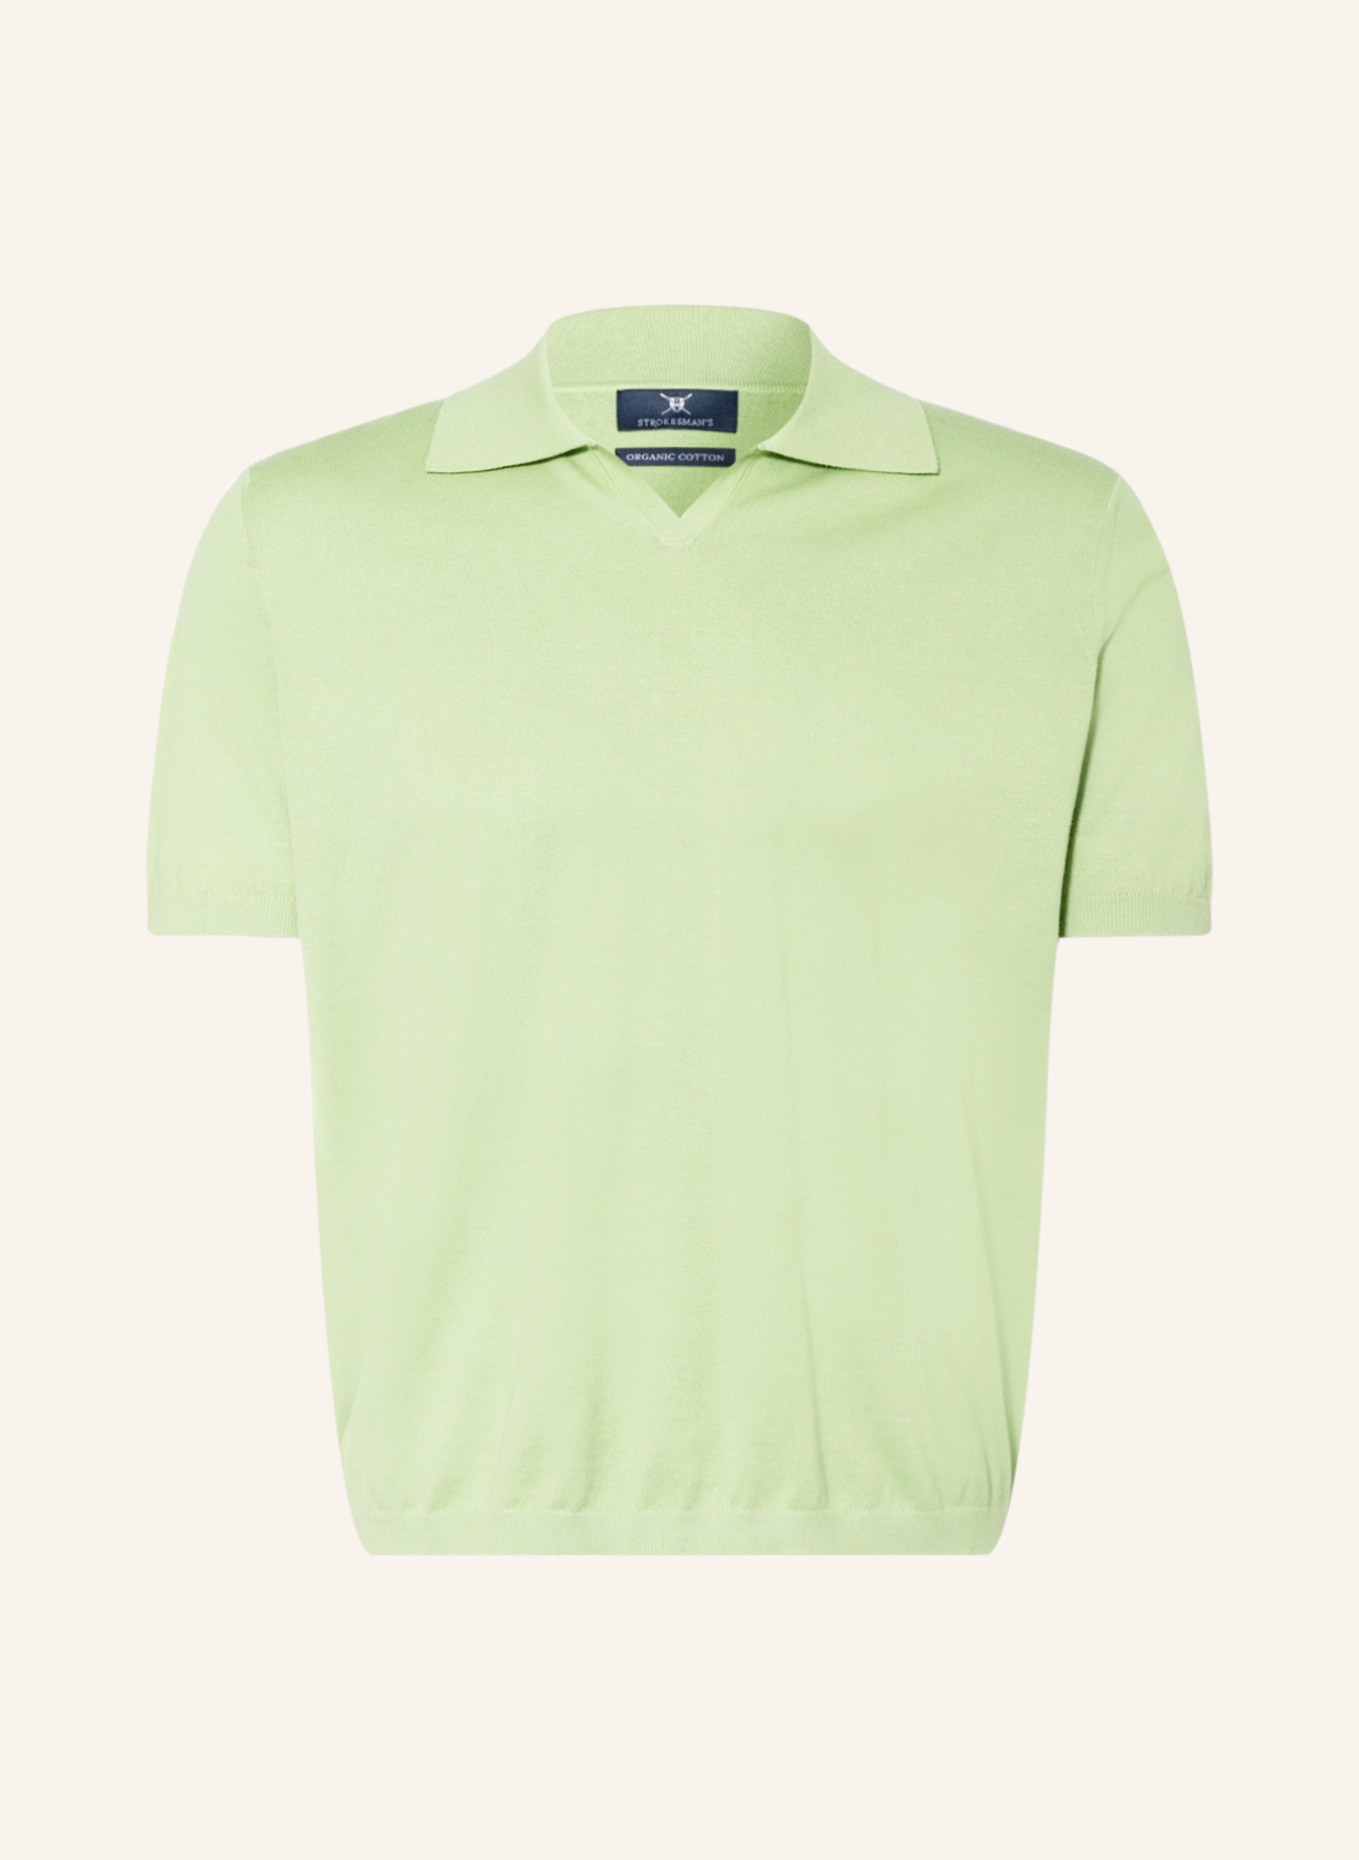 STROKESMAN'S Knitted polo shirt, Color: LIGHT GREEN (Image 1)